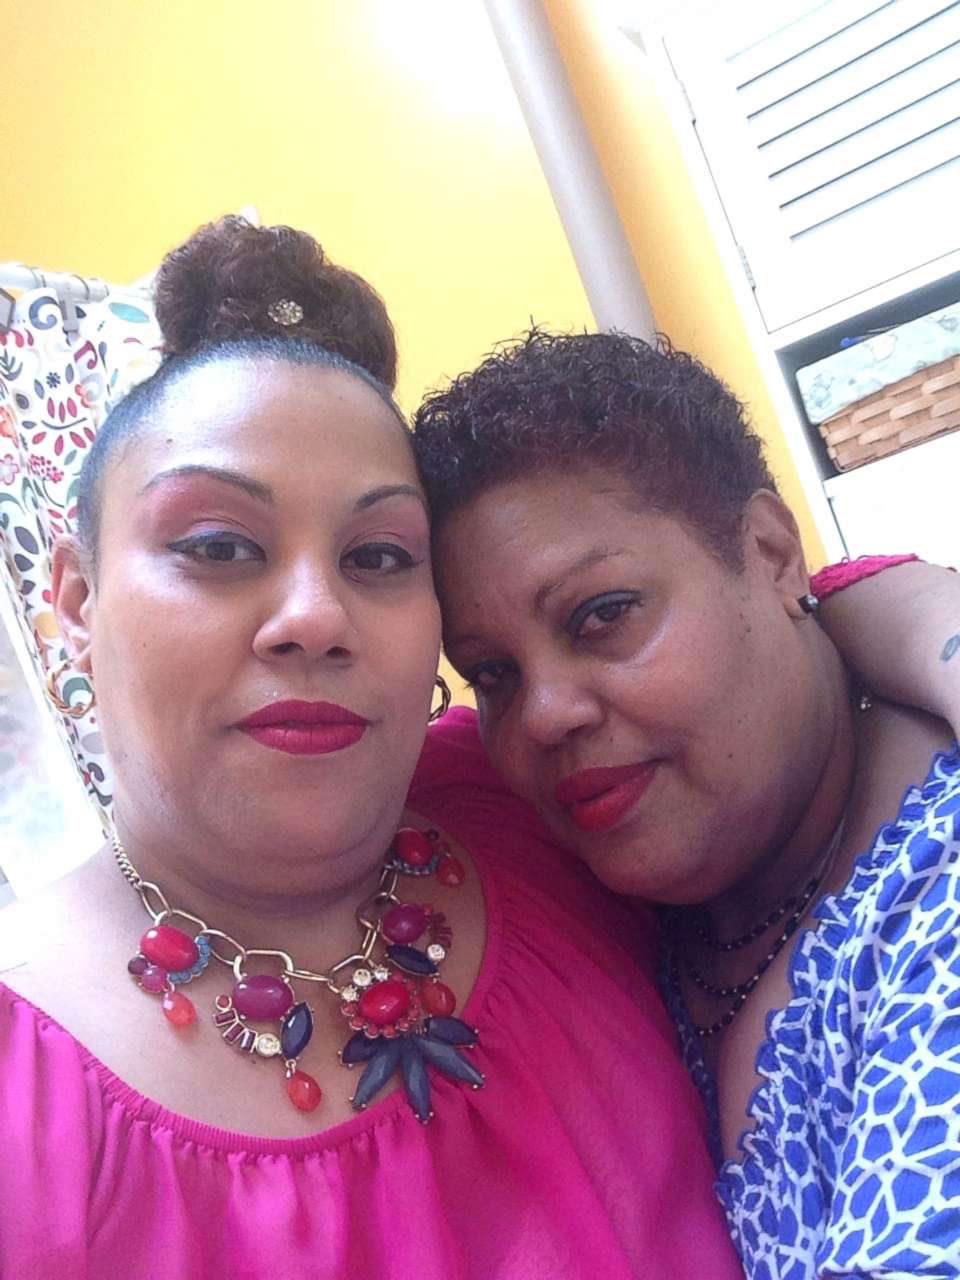 PHOTO: Odalis Santana with her mother, Ana, who died in April of COVID-19. The mother and daughter were best friends, like twins, according to Santana.